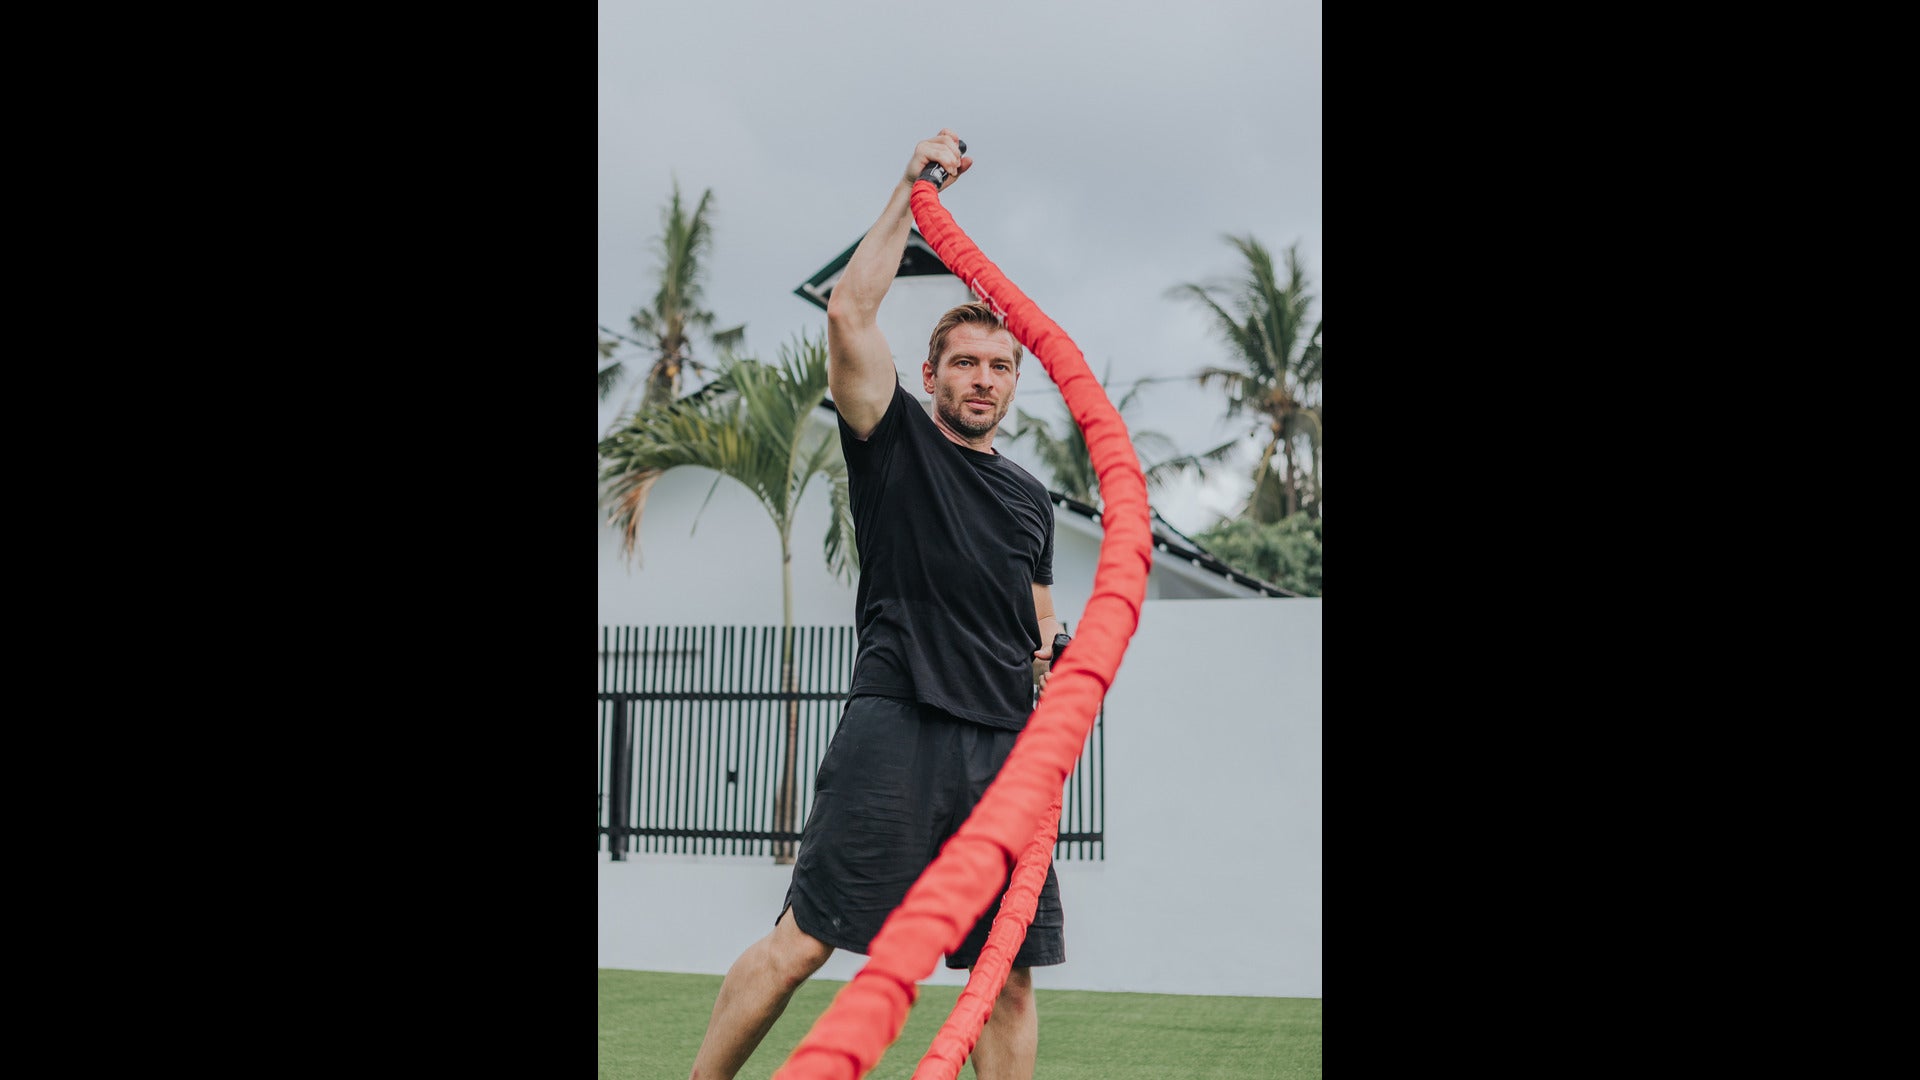 Conquer Your Workout Goals with Outdoor Battle Rope Training